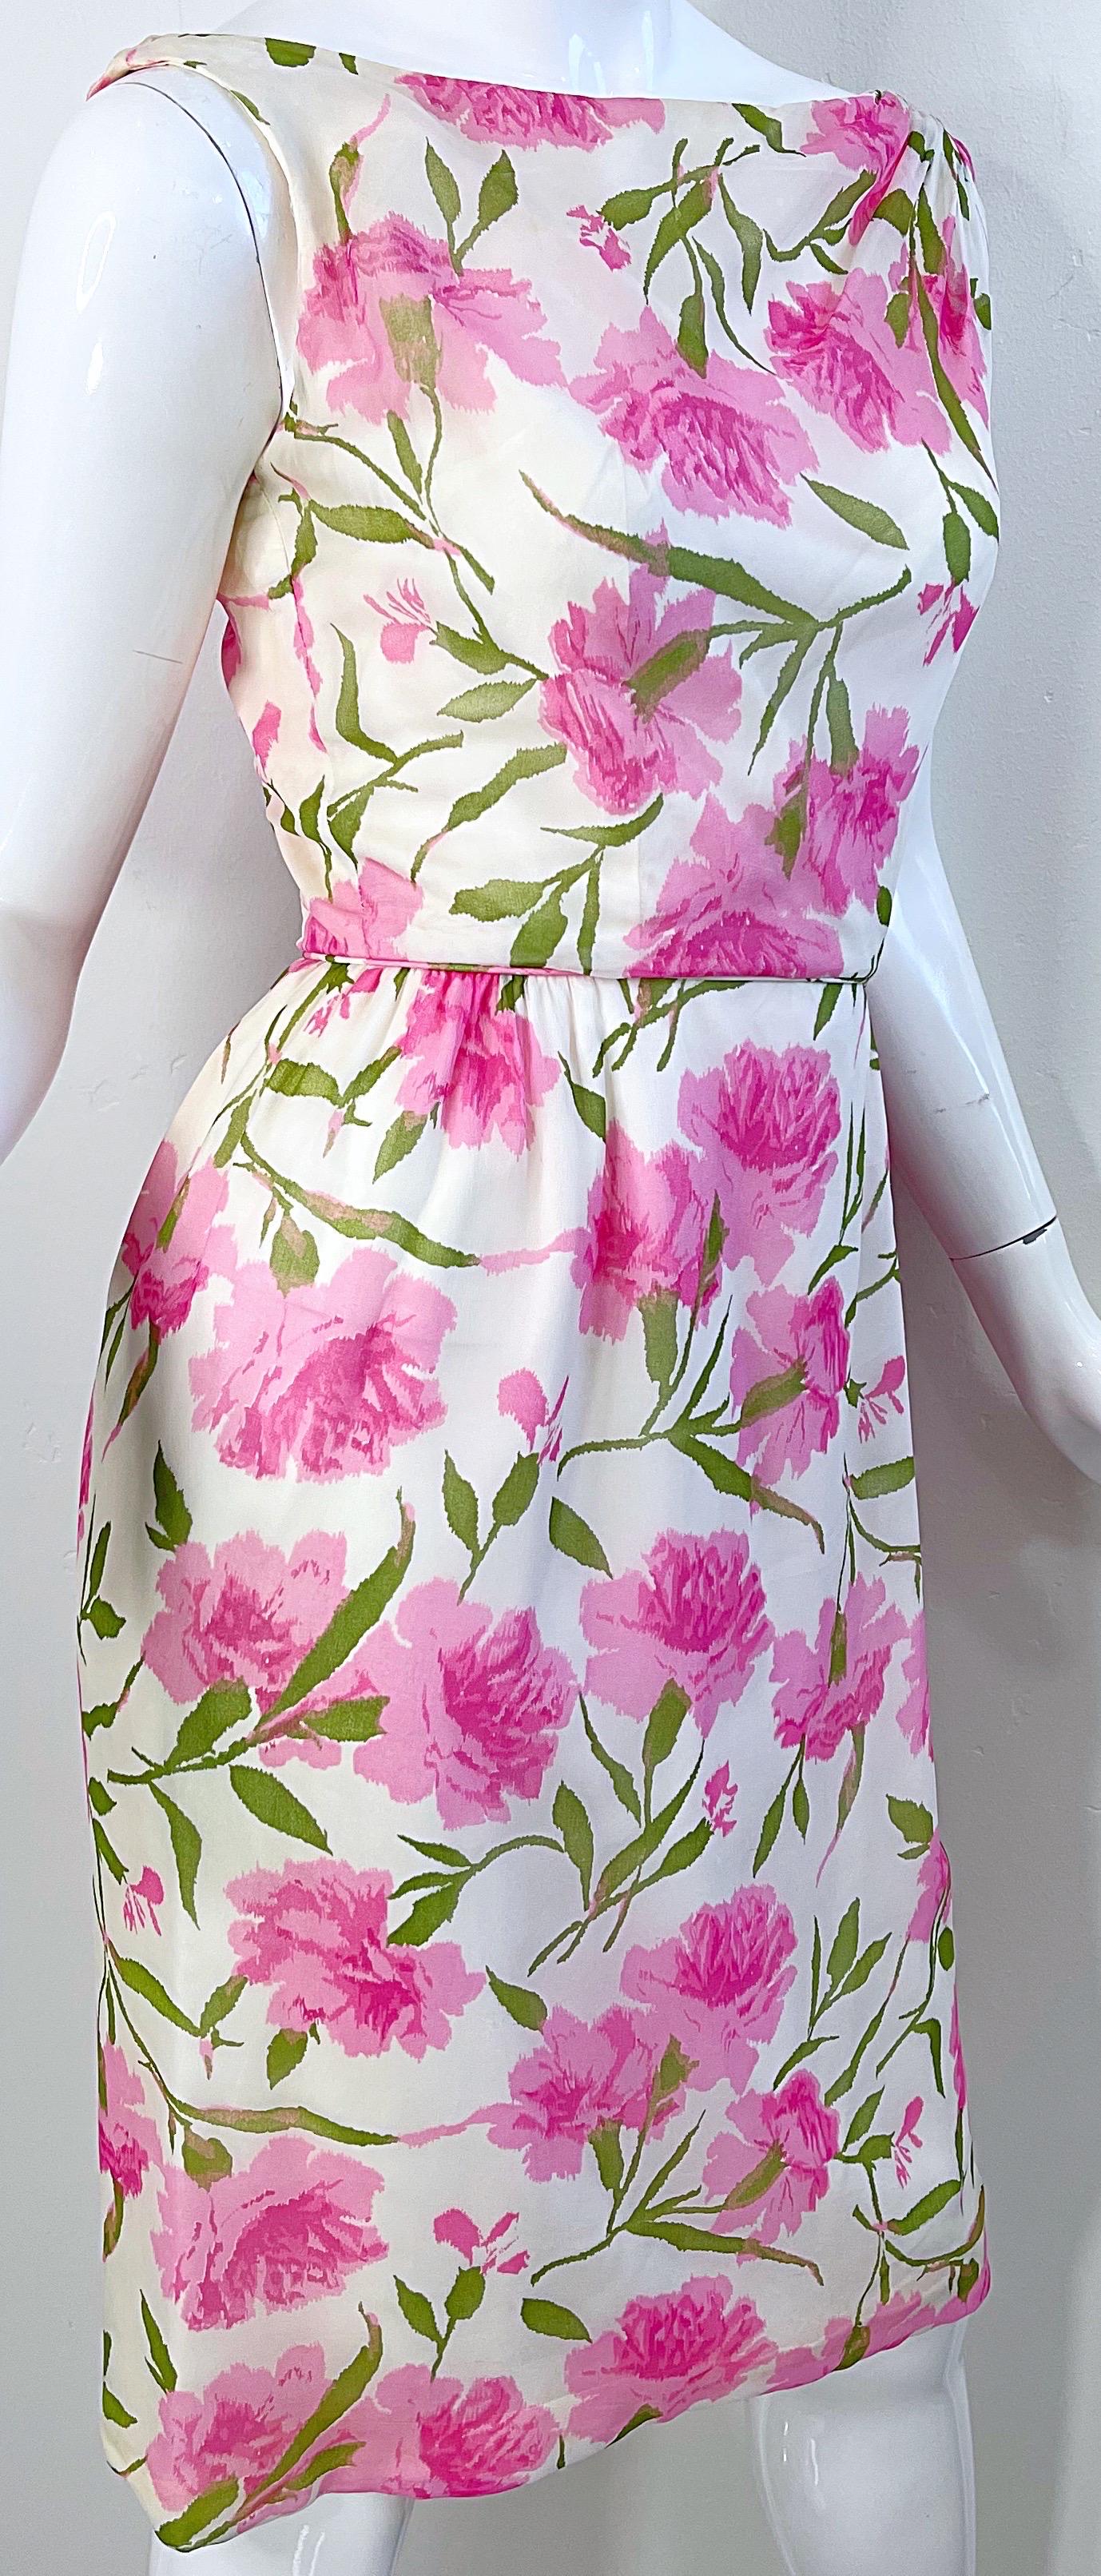 1960s Demi Couture Silk Chiffon Flower Print Pink + Green Vintage 60s Dress For Sale 3